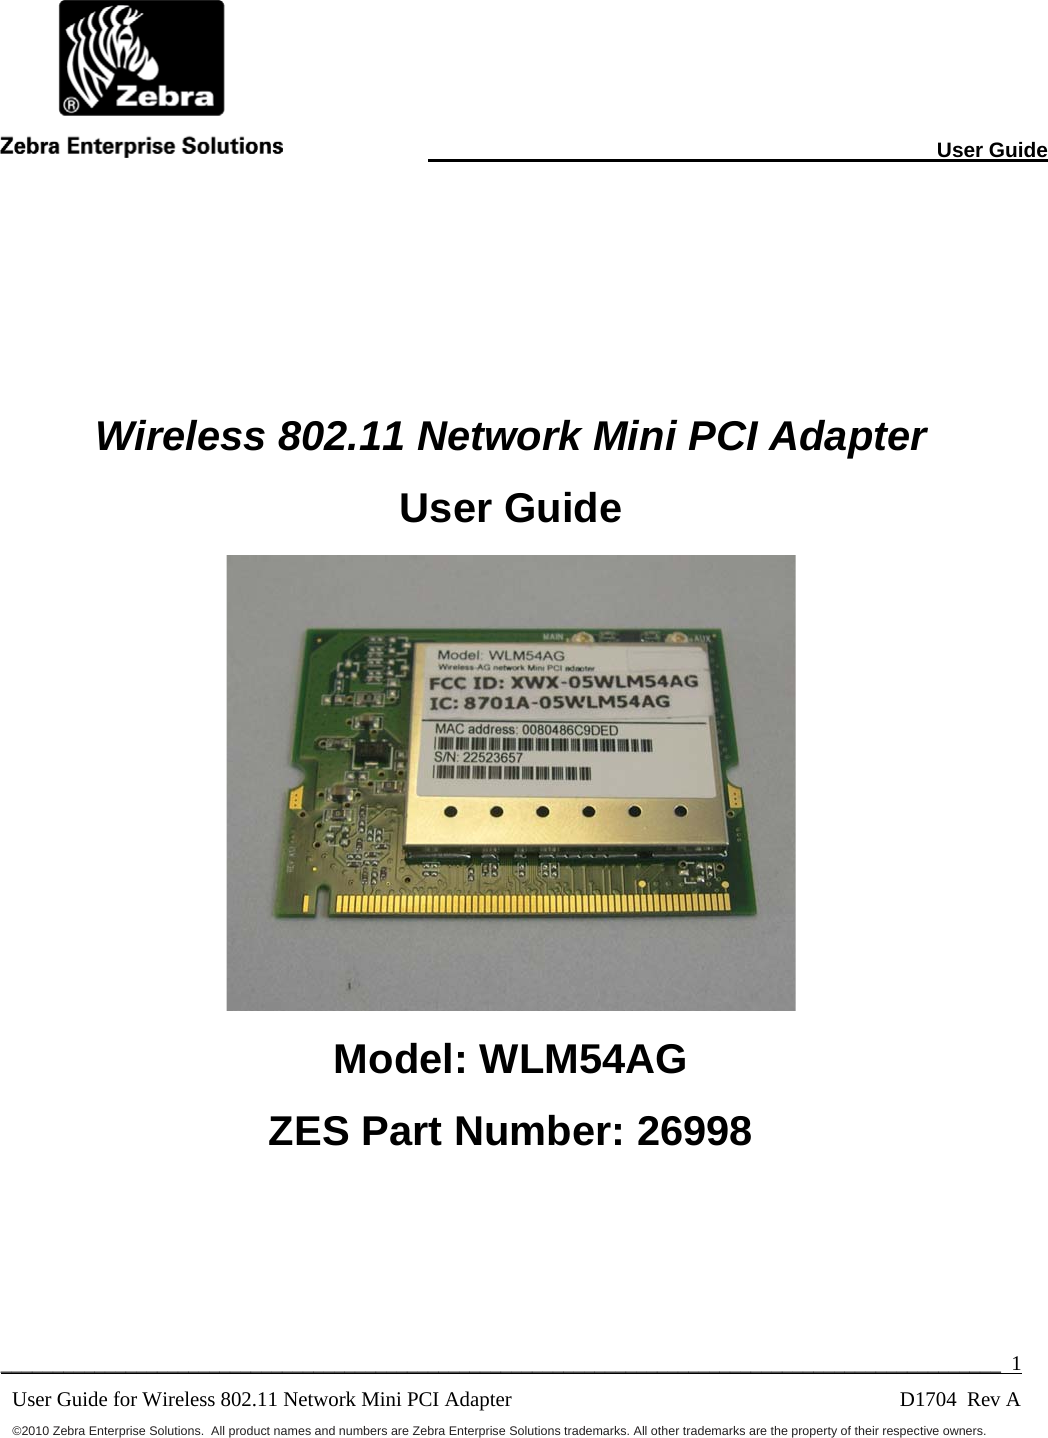                                                                                                                       User Guide  ________________________________________________________________________________________________  1 User Guide for Wireless 802.11 Network Mini PCI Adapter        D1704  Rev A ©2010 Zebra Enterprise Solutions.  All product names and numbers are Zebra Enterprise Solutions trademarks. All other trademarks are the property of their respective owners.    Wireless 802.11 Network Mini PCI Adapter User Guide  Model: WLM54AG ZES Part Number: 26998  